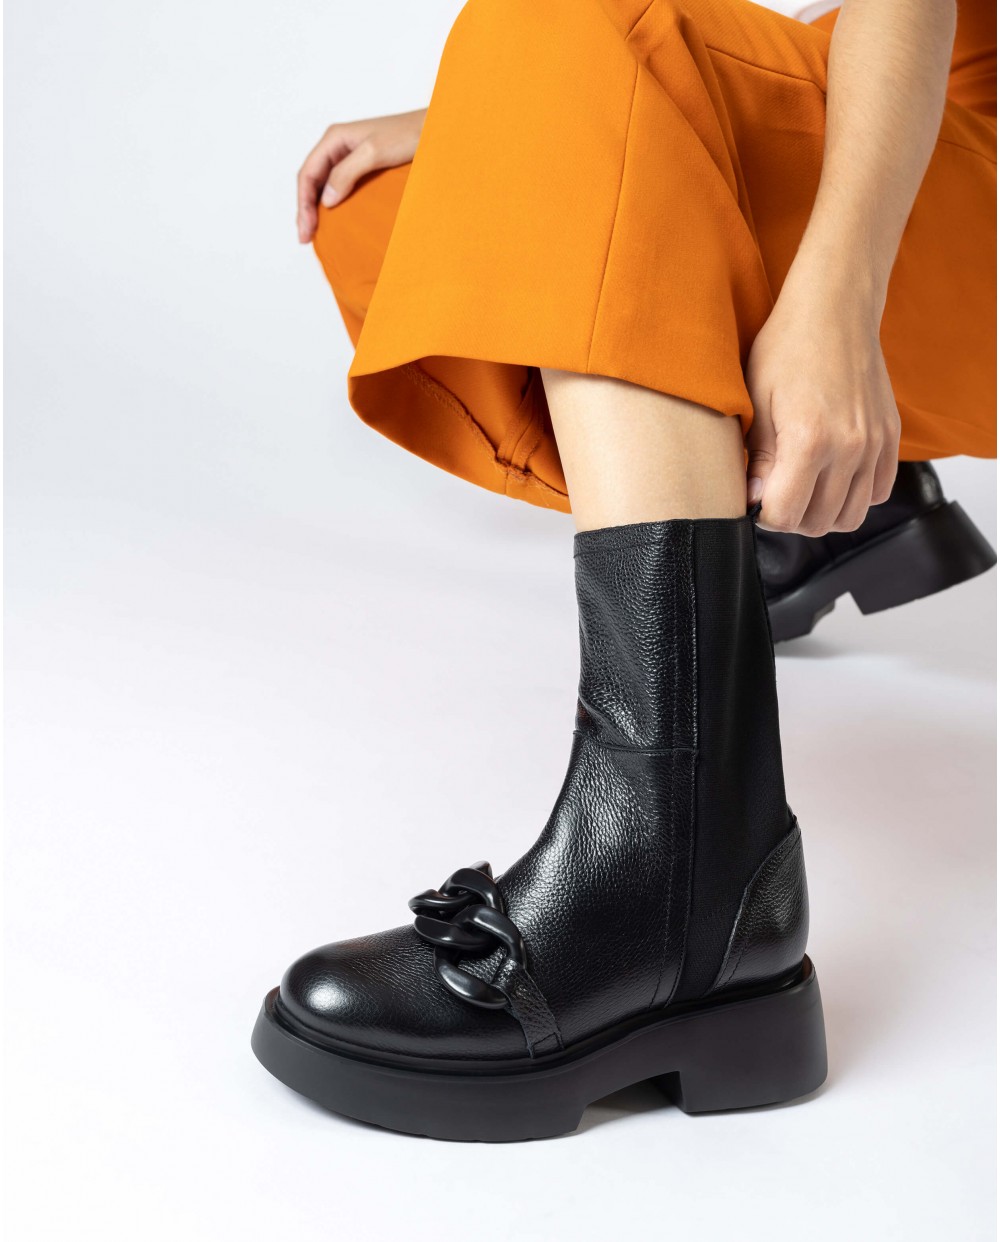 Wonders-Outlet-Black Aiko Ankle Boot